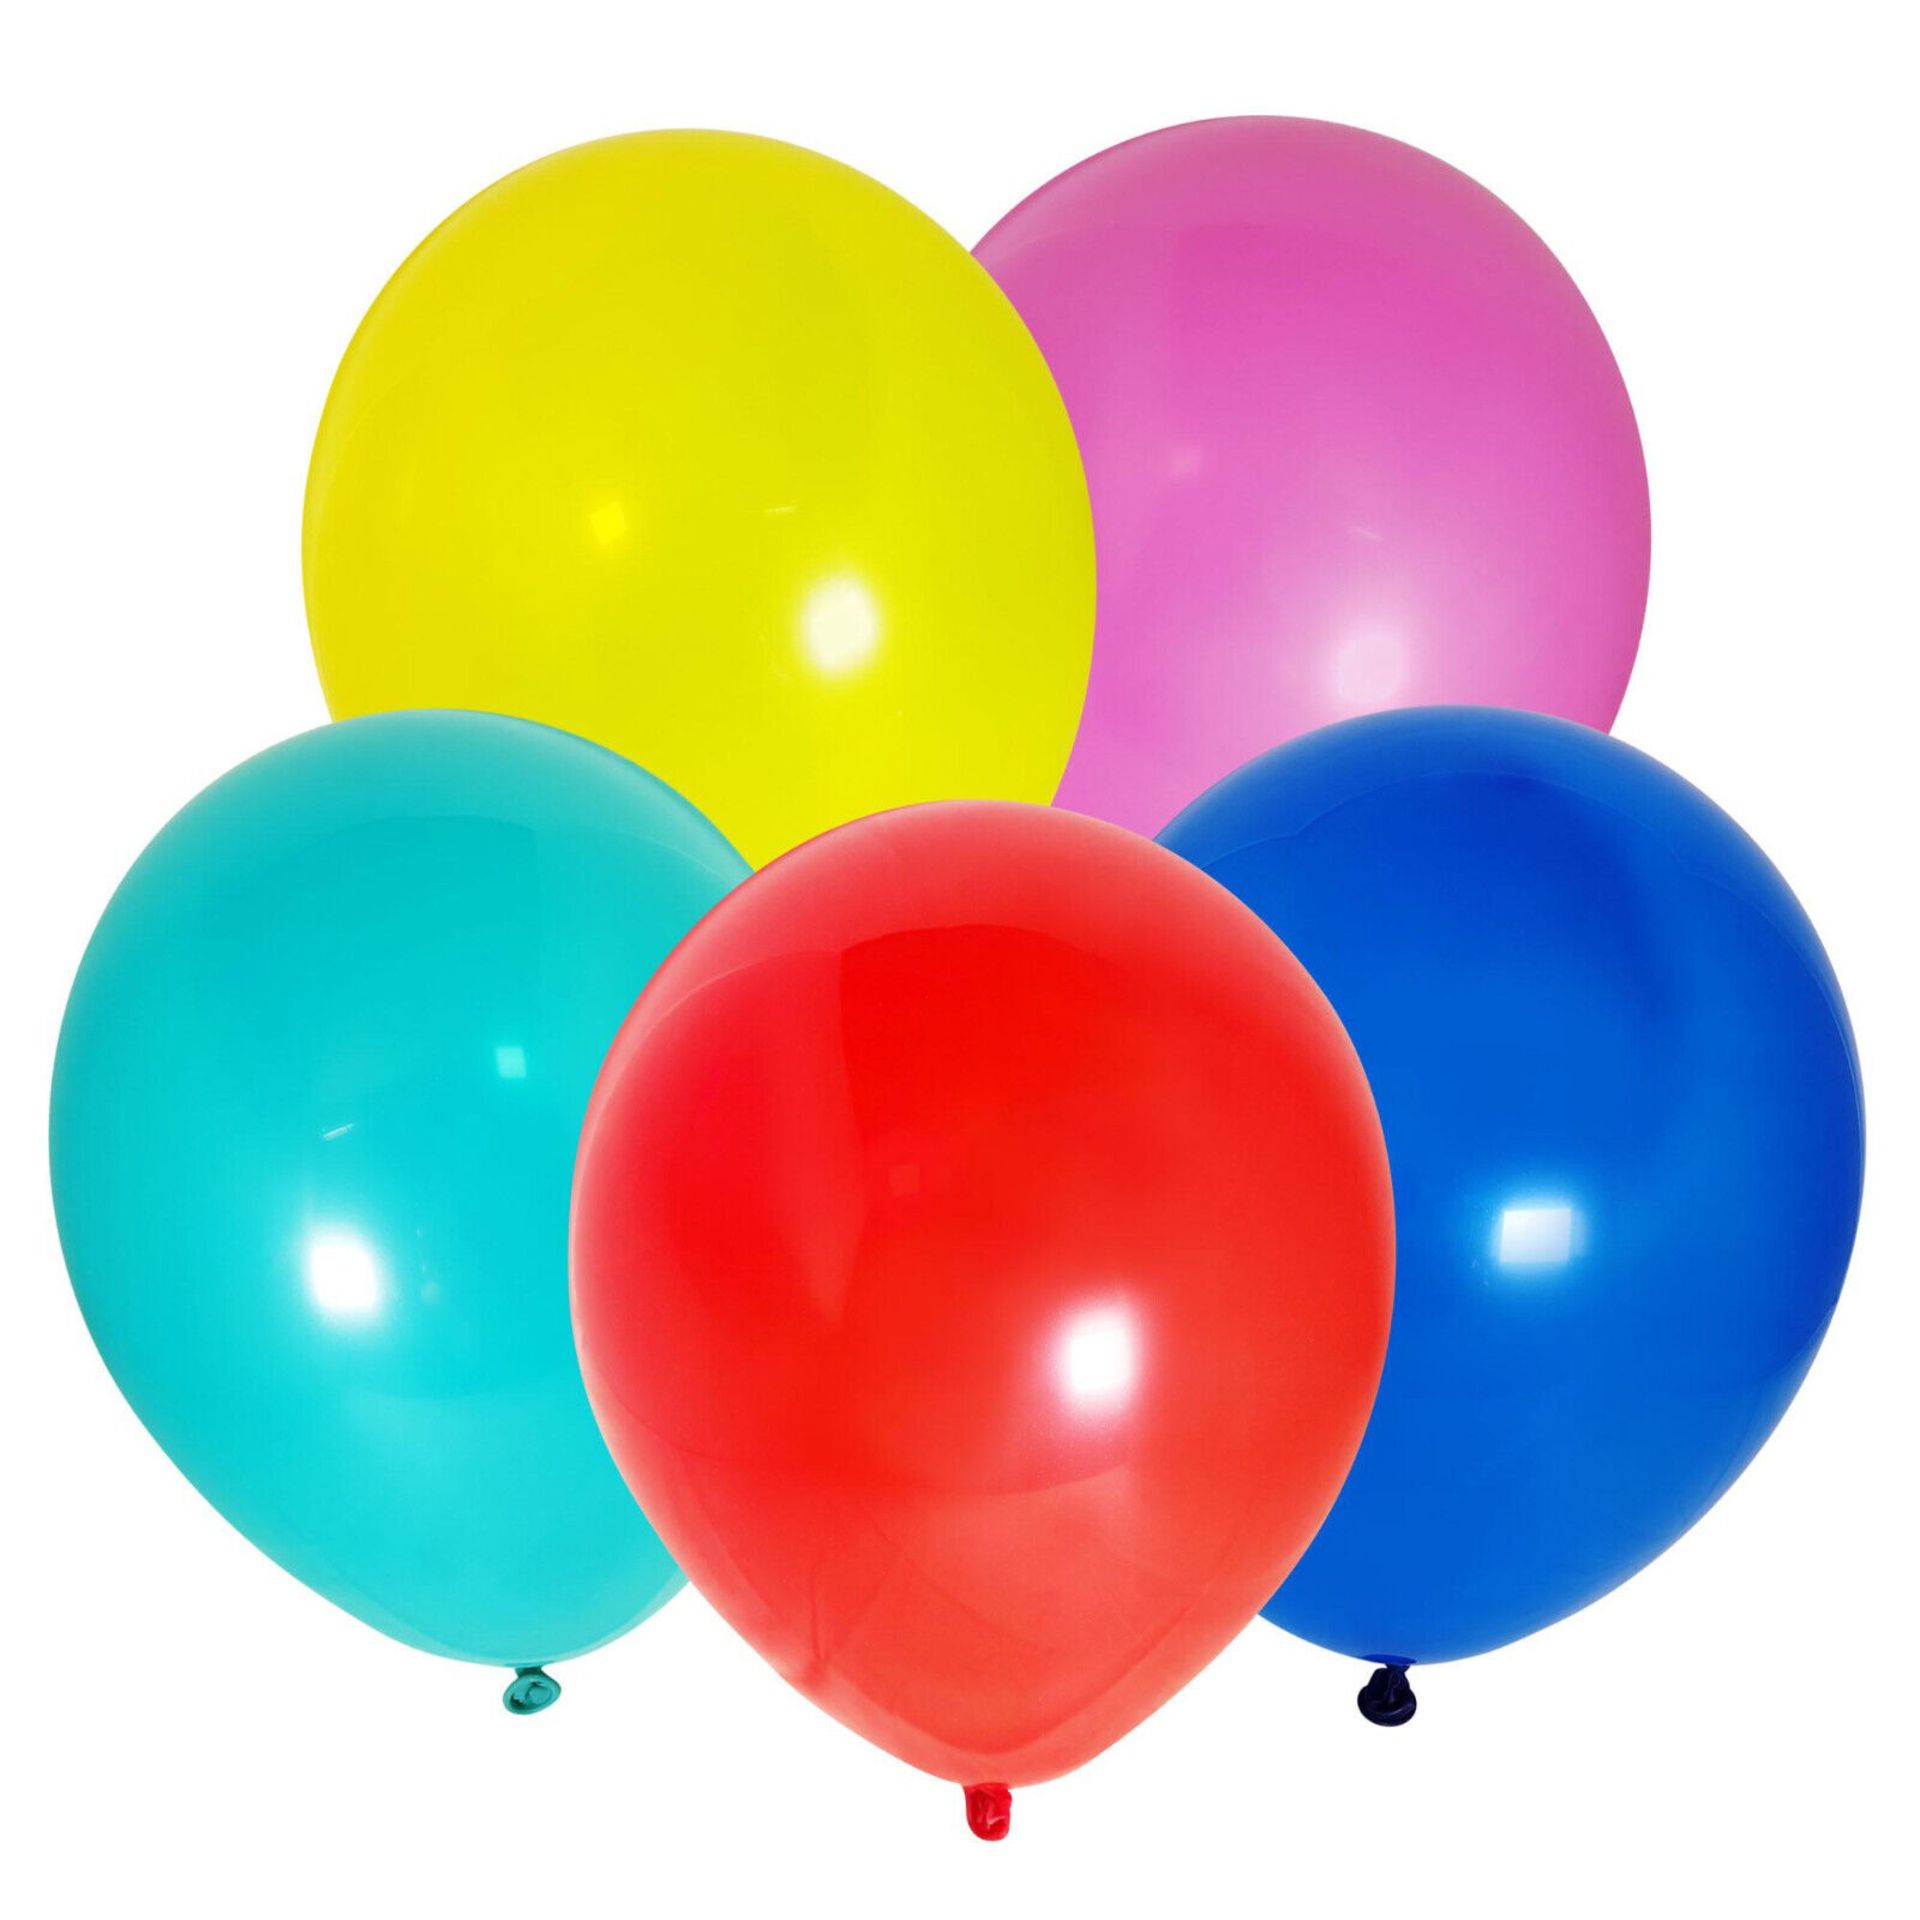 250 X NEW 9"&6" - 24 PACK ASSORTED COLOURED BALLOONS - Image 4 of 4